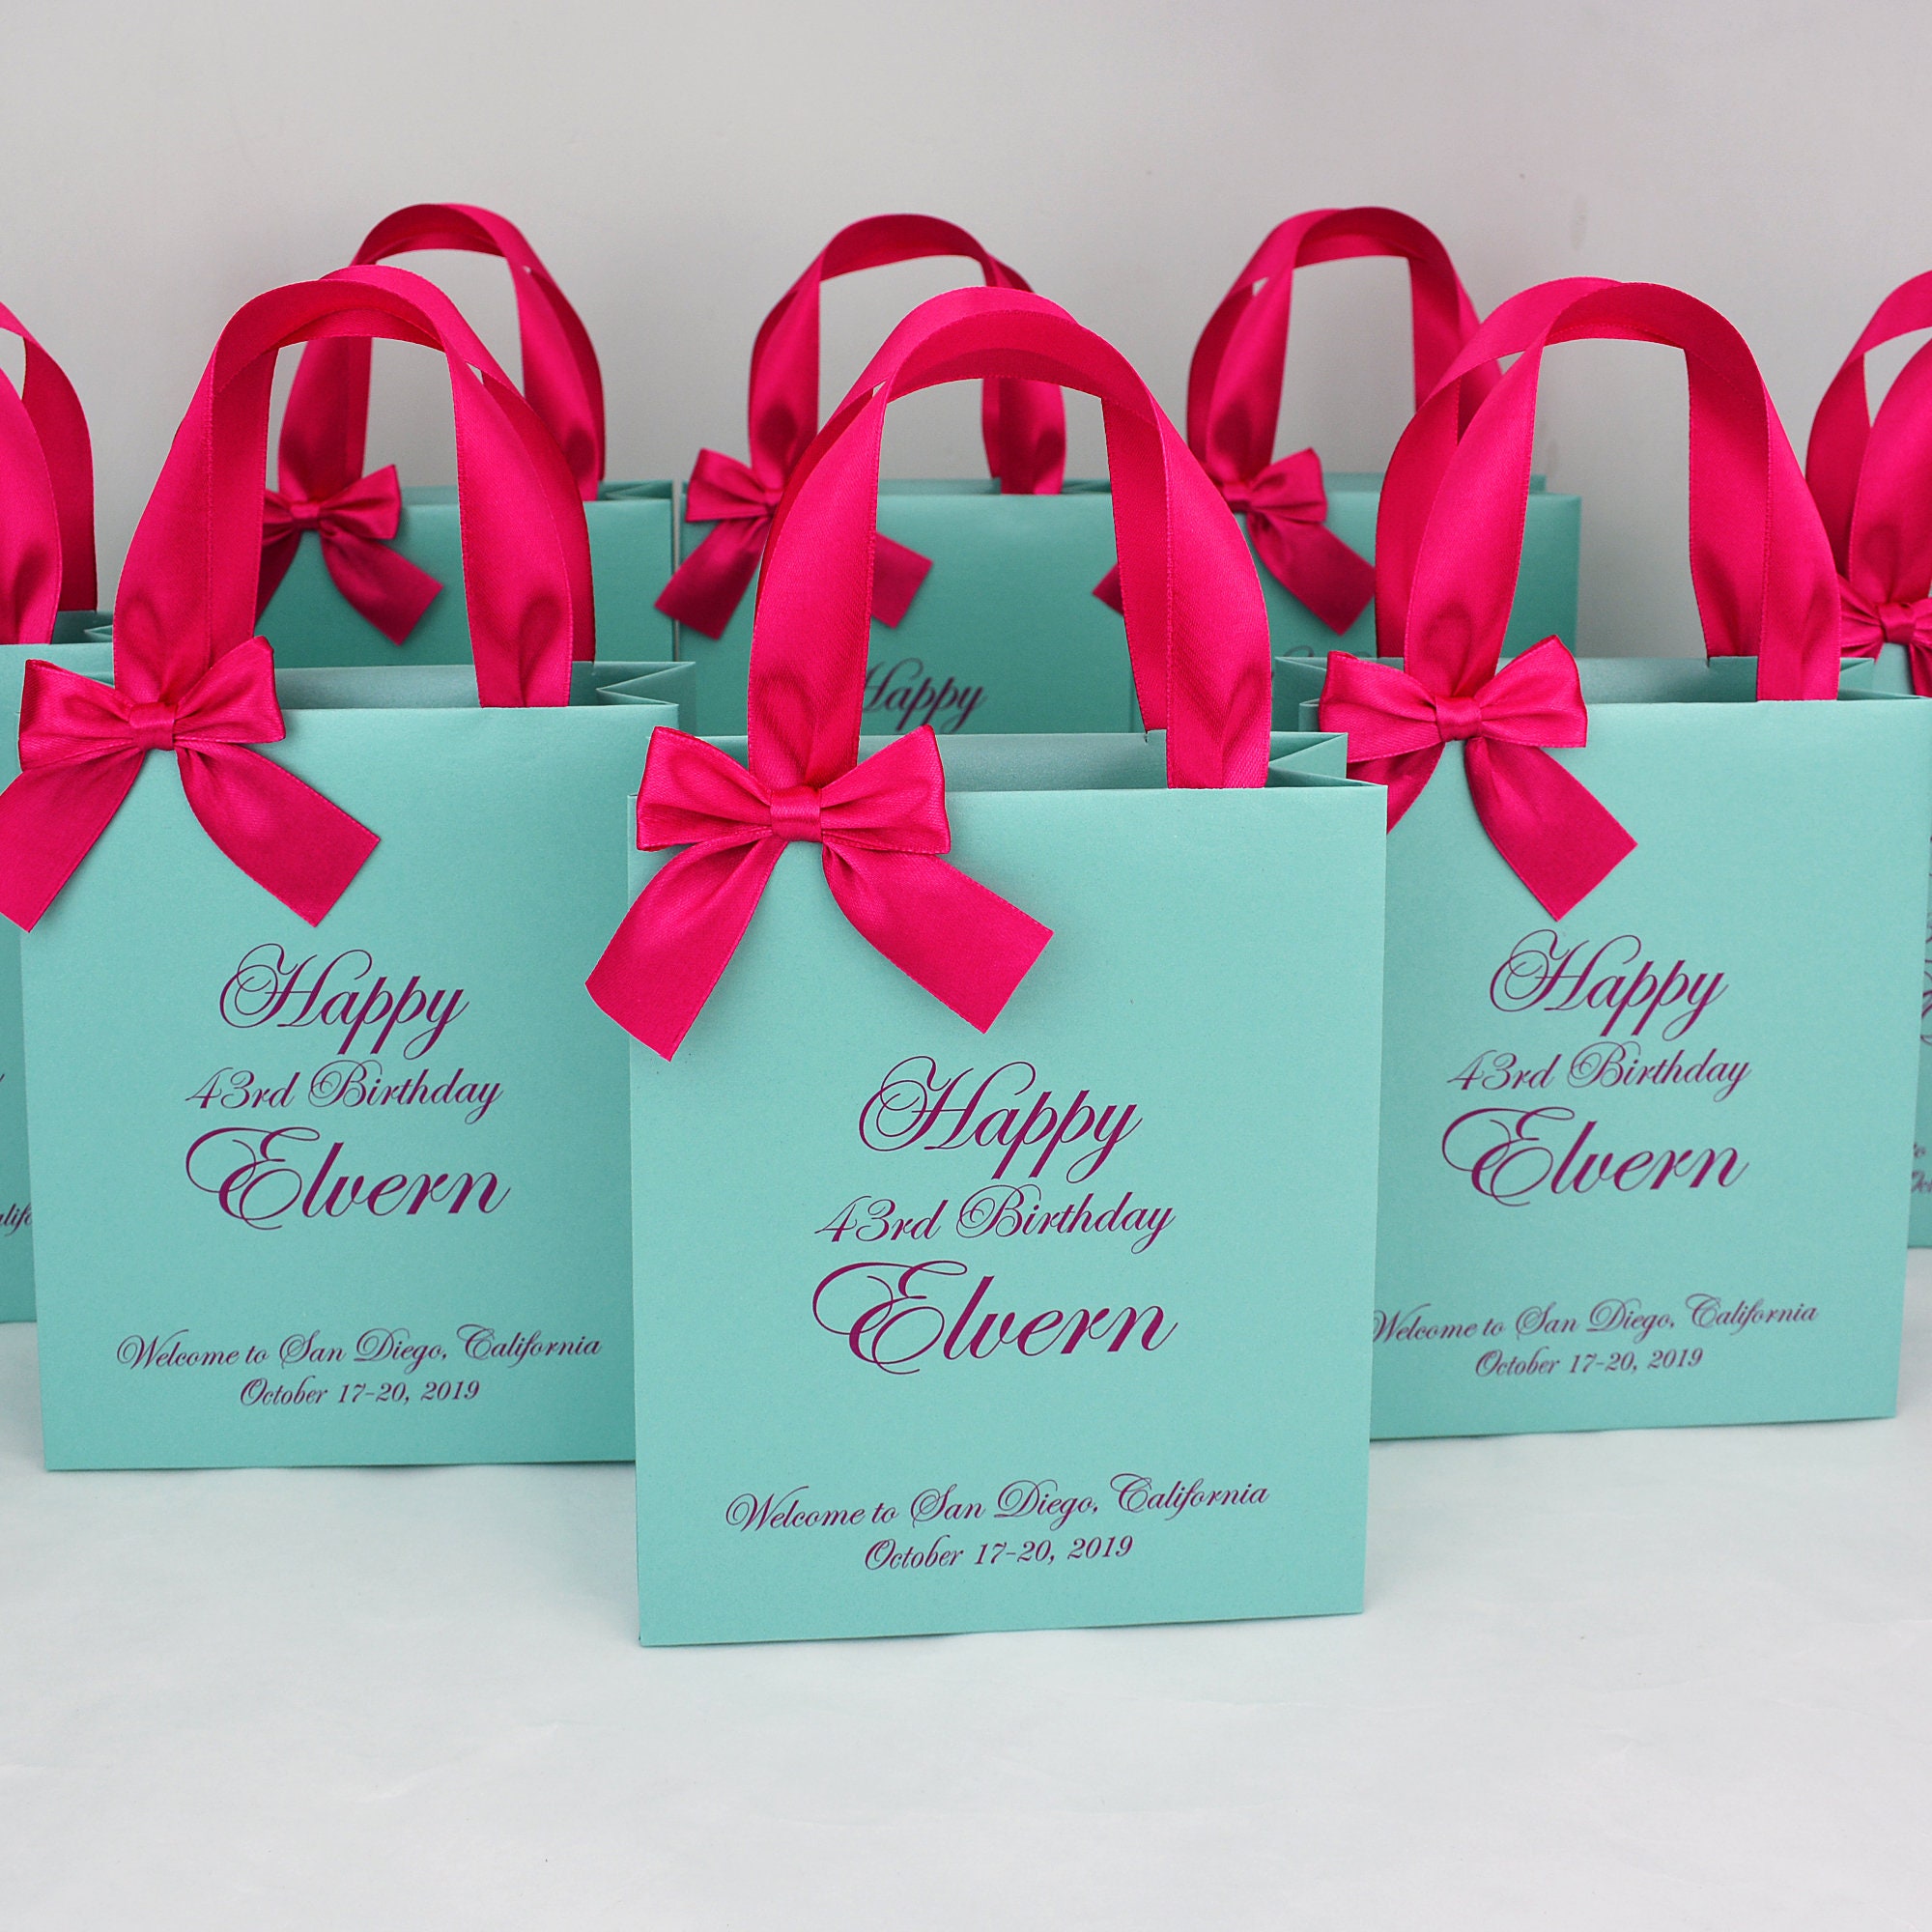  Hammont Wedding Bridesmaid Gift Bags - Checkered Design Party  Favors - 12 Pack Foil Stamped Gift Bag for Hotel Guests - Durable Ribbon  Handles - Beautiful Birthday Present Bags - 9”x